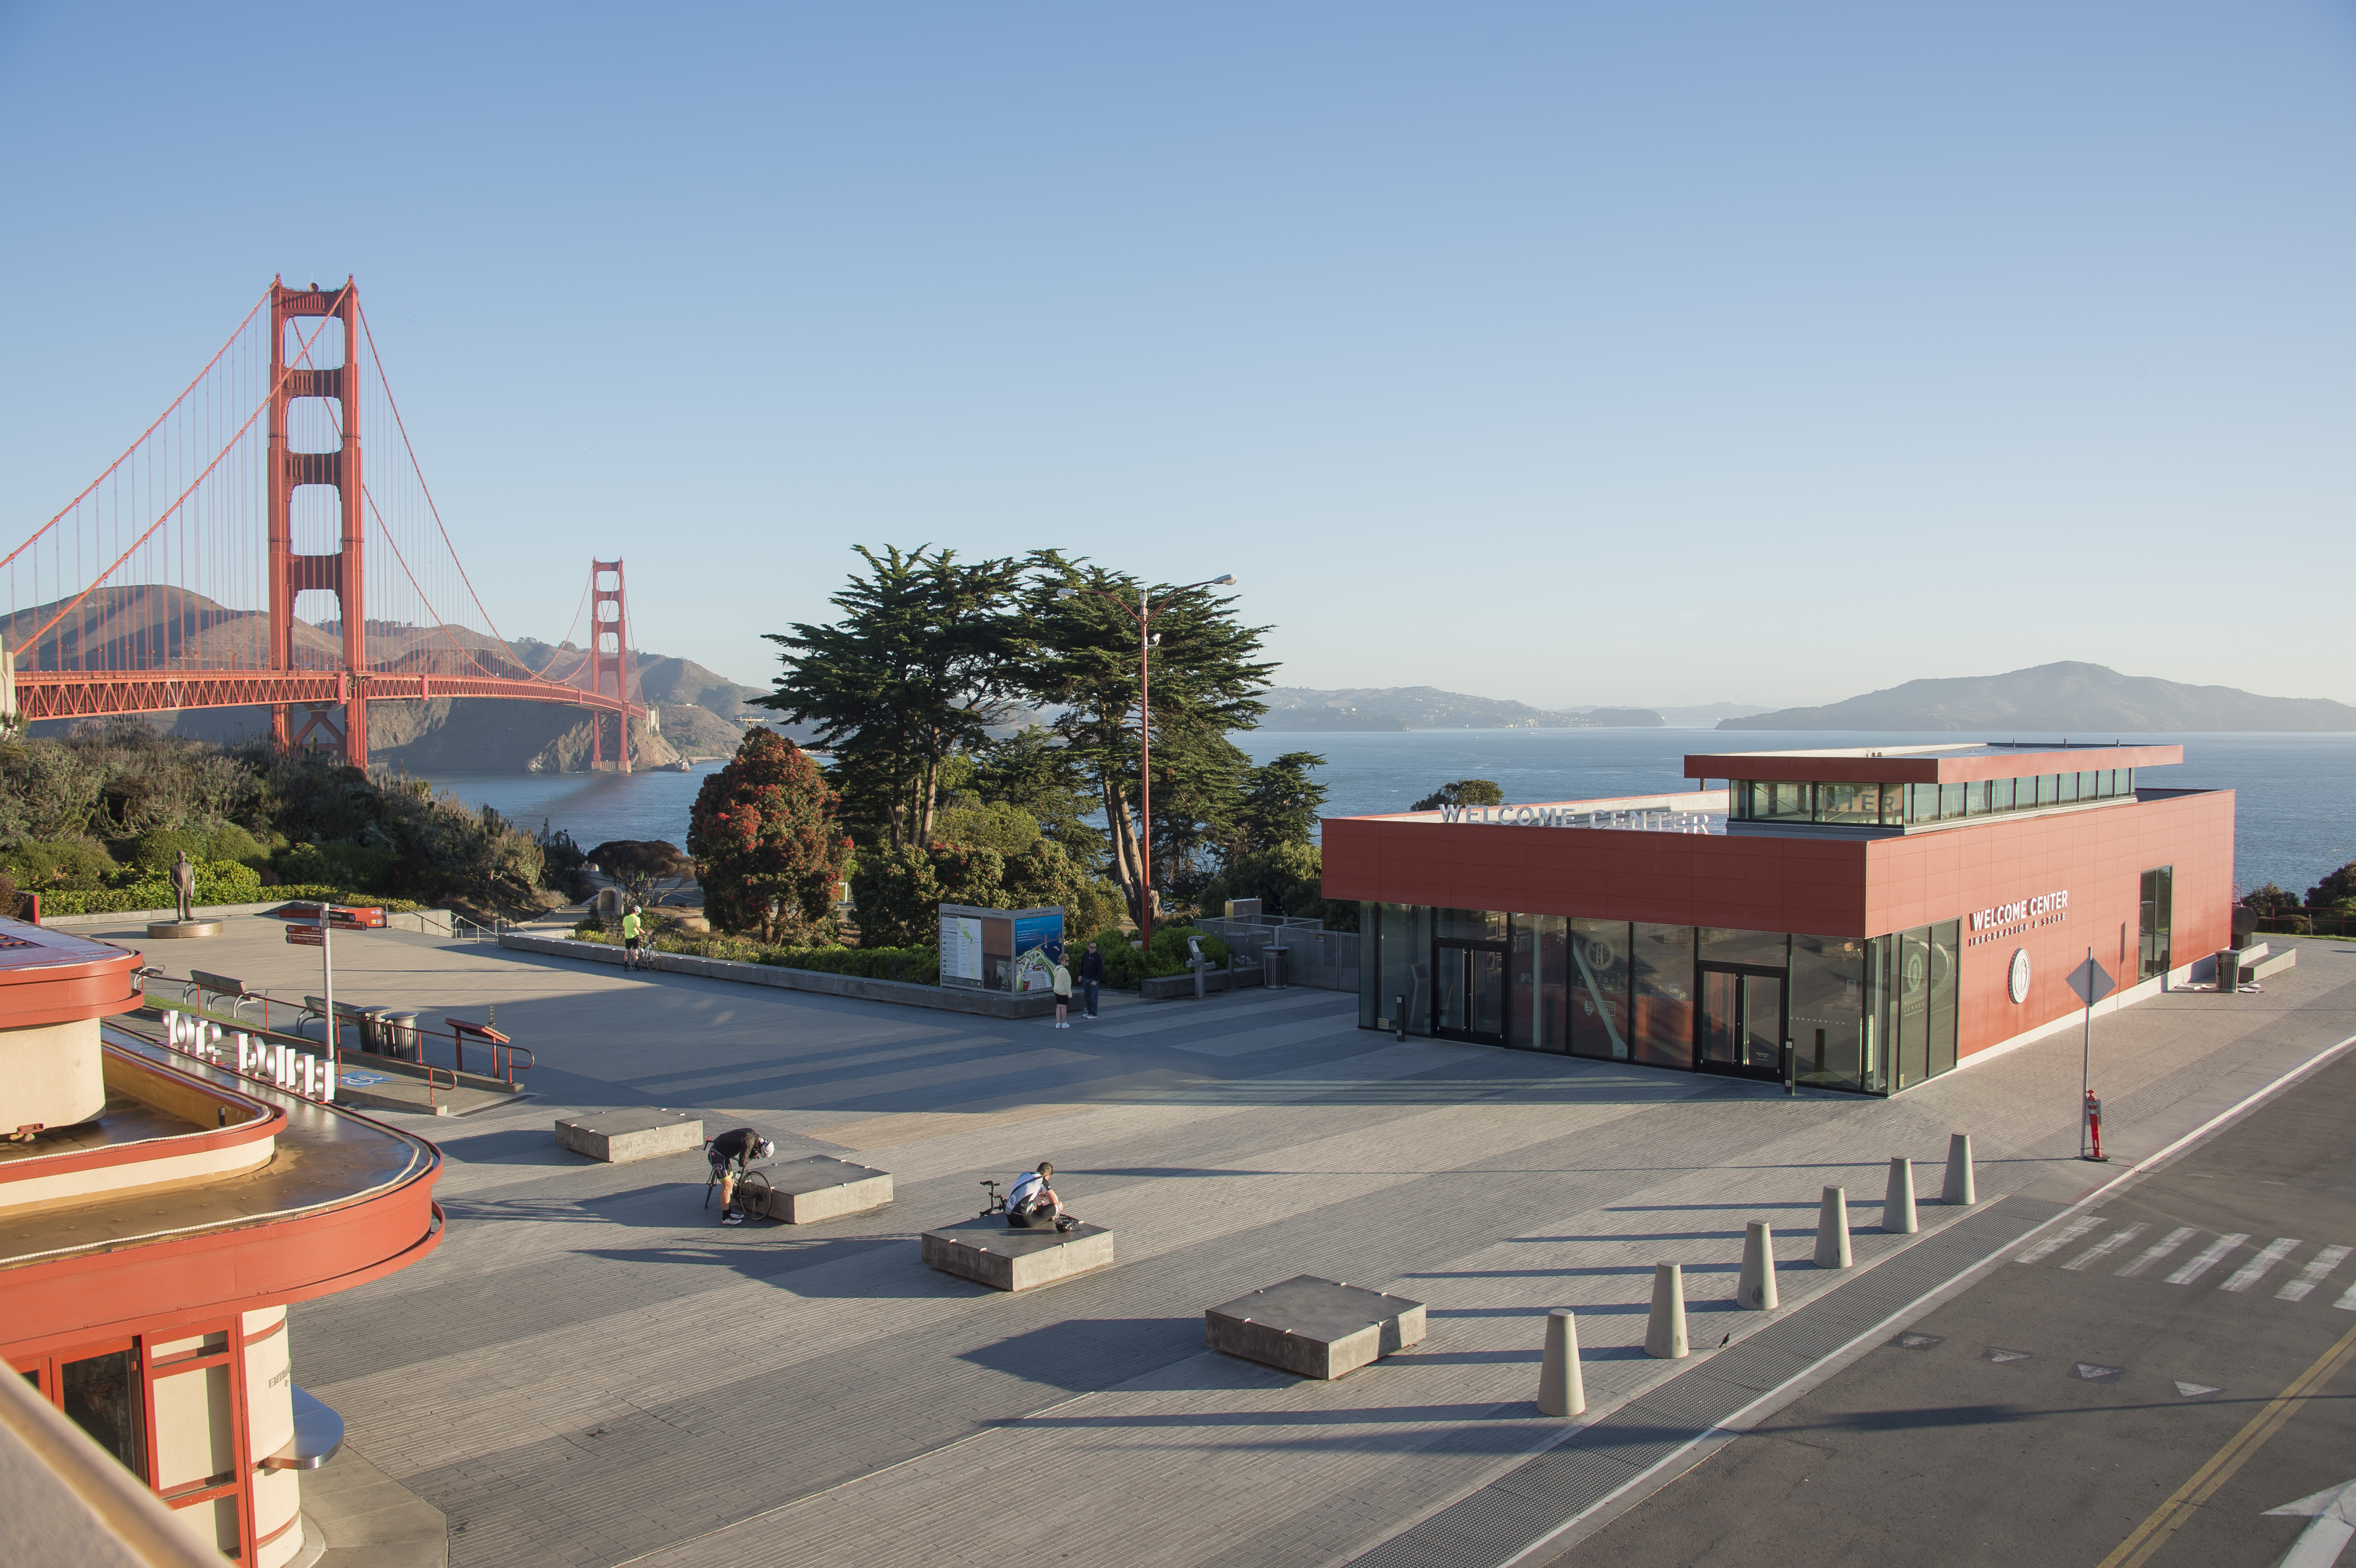 Aerial shot of the Golden Gate Bridge Welcome Center and the Golden Gate Bridge.